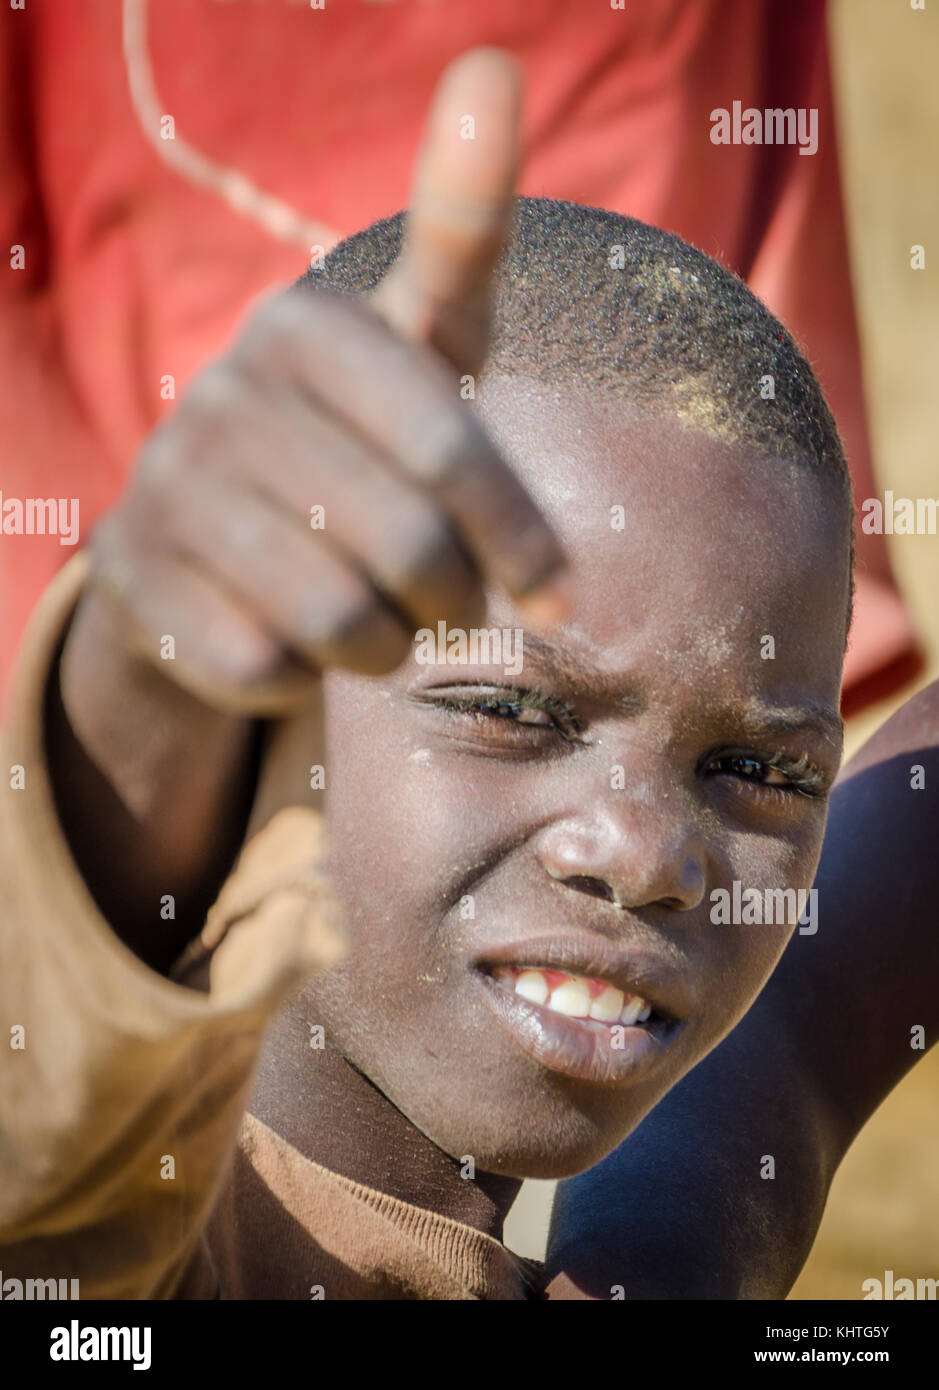 CAOTINHA, BENGUELA, ANGOLA - MAY 11 2014: Portrait of unidentified African boy with dirty face showing a thumbs up sign Stock Photo